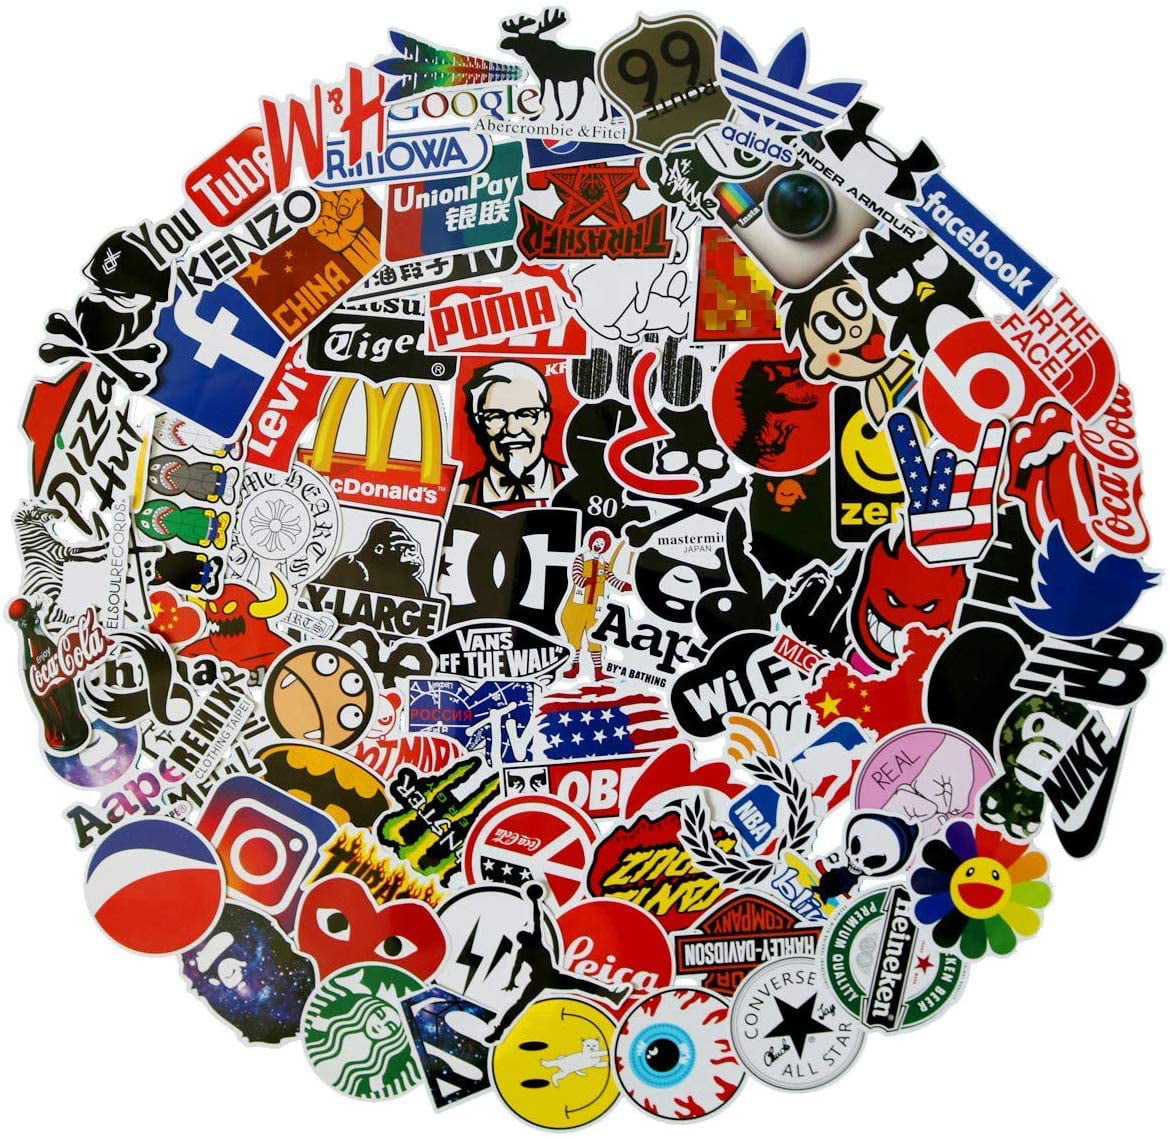 100 Pcs Fashion Brand Stickers for Laptop Stickers Motorcycle Bicycle Skateboard Luggage Decal Graffiti Patches Stickers for No-Duplicate Sticker Pack 